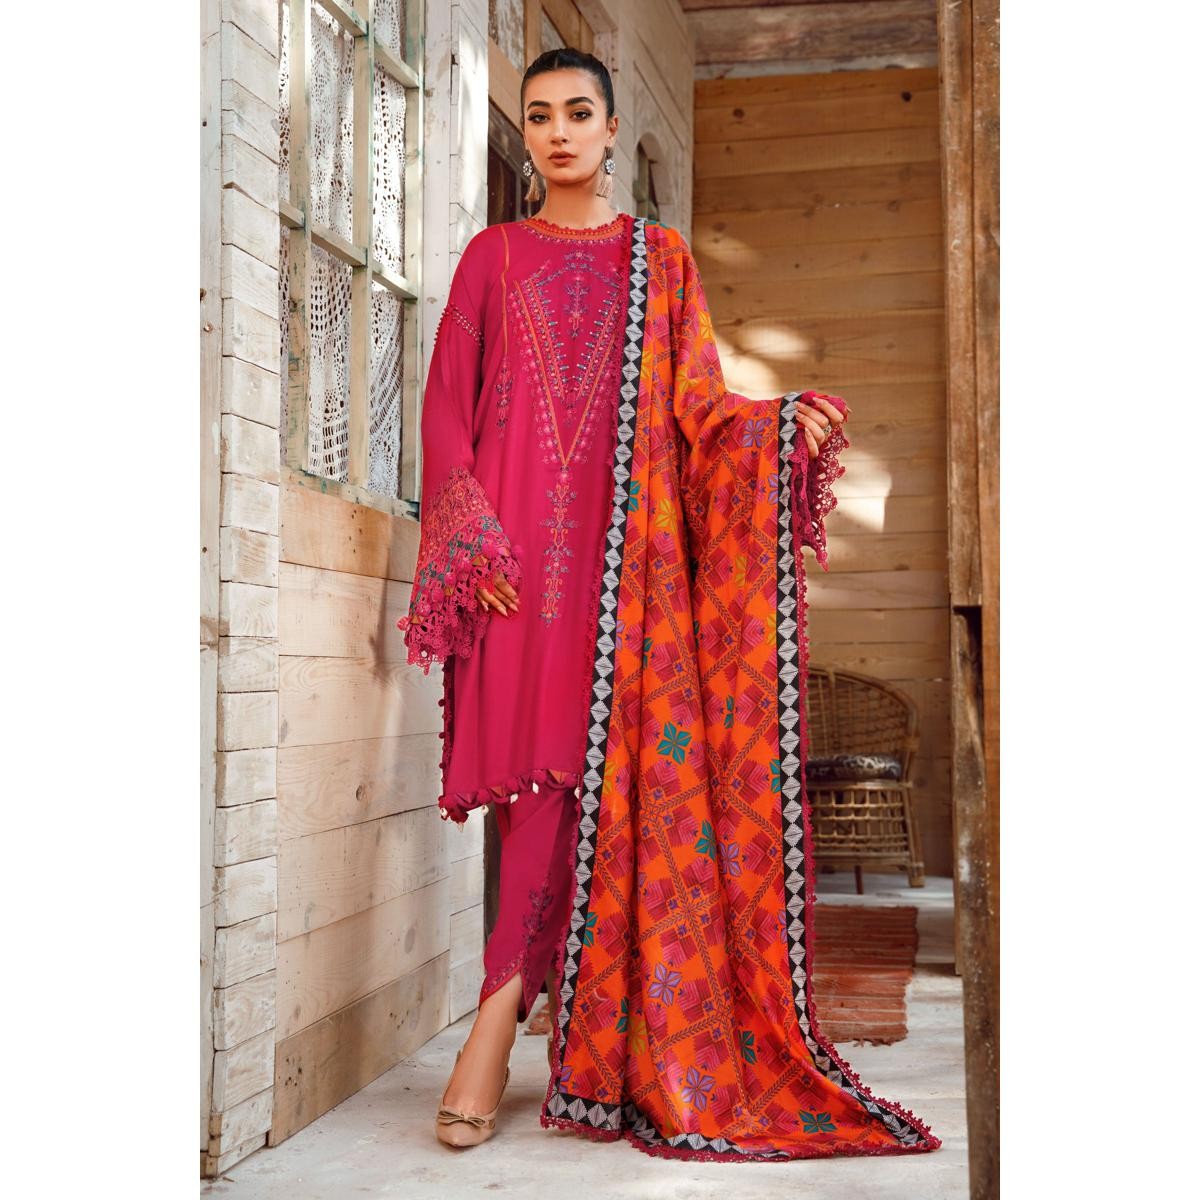 Maria B Karandi Unstitched 3 Piece Suit For Women Collection Winter Shawl '22 3 Piece Mpt-1604-a